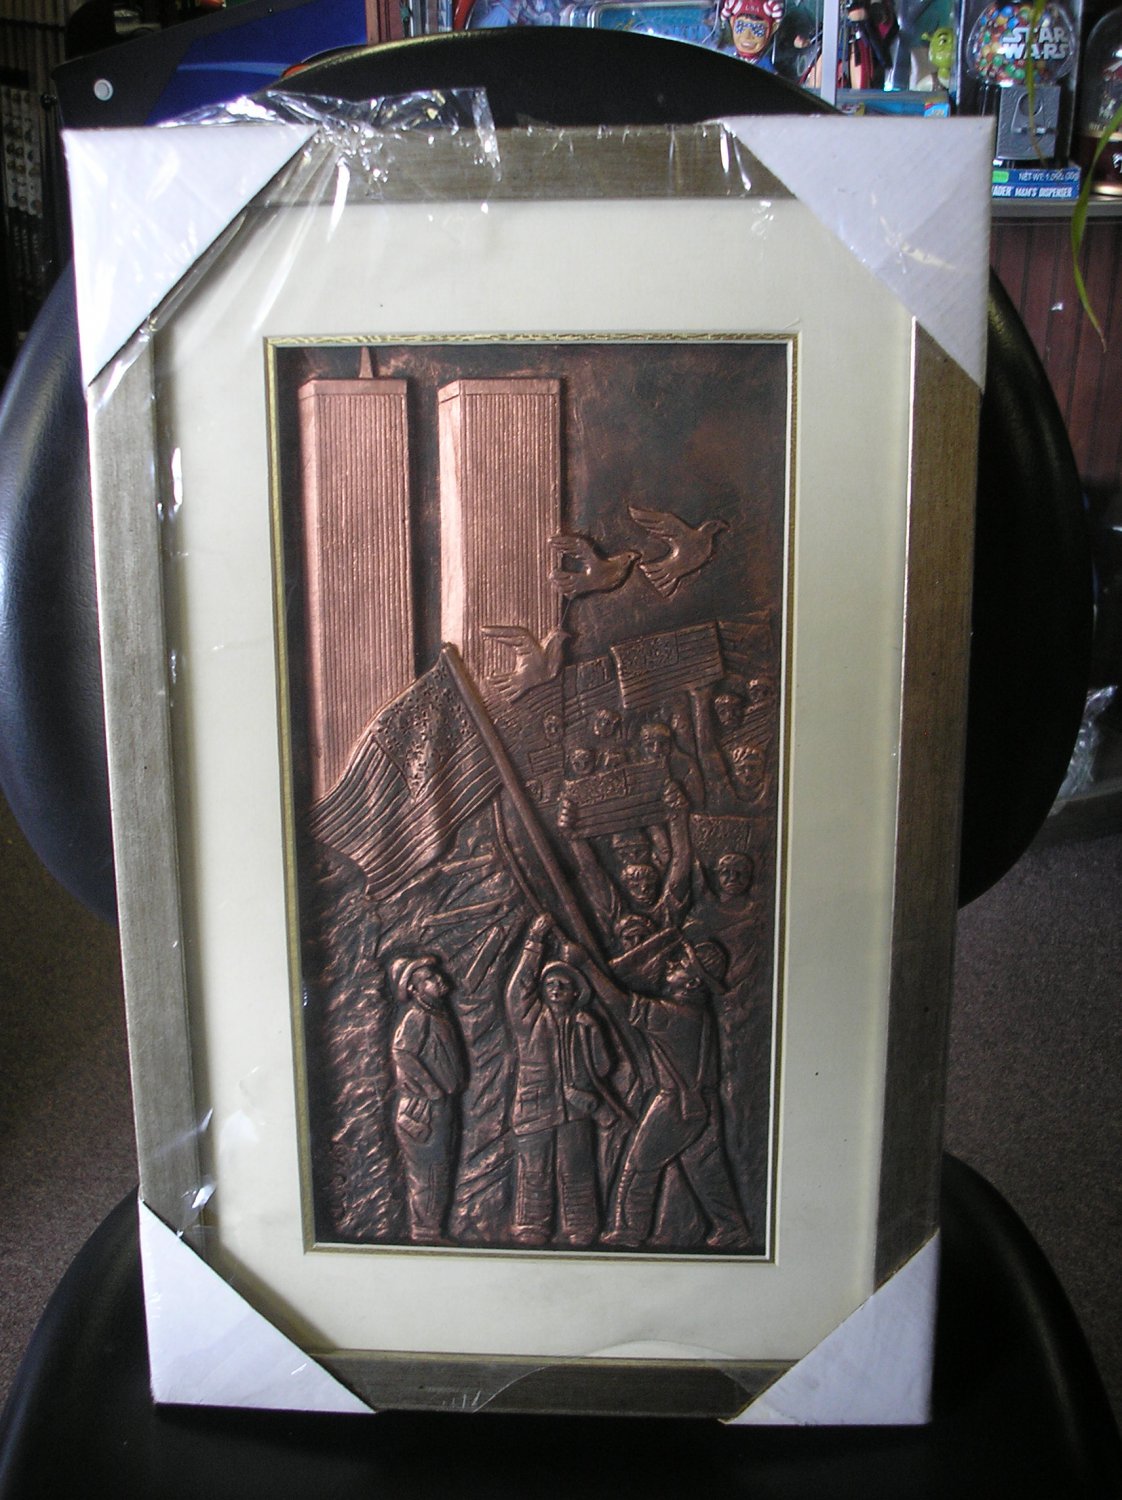 Twin Towers Commemorative Plaque handmade by Sunny S. Du 9/11/2001 LIMITED EDITION - BRAND NEW!